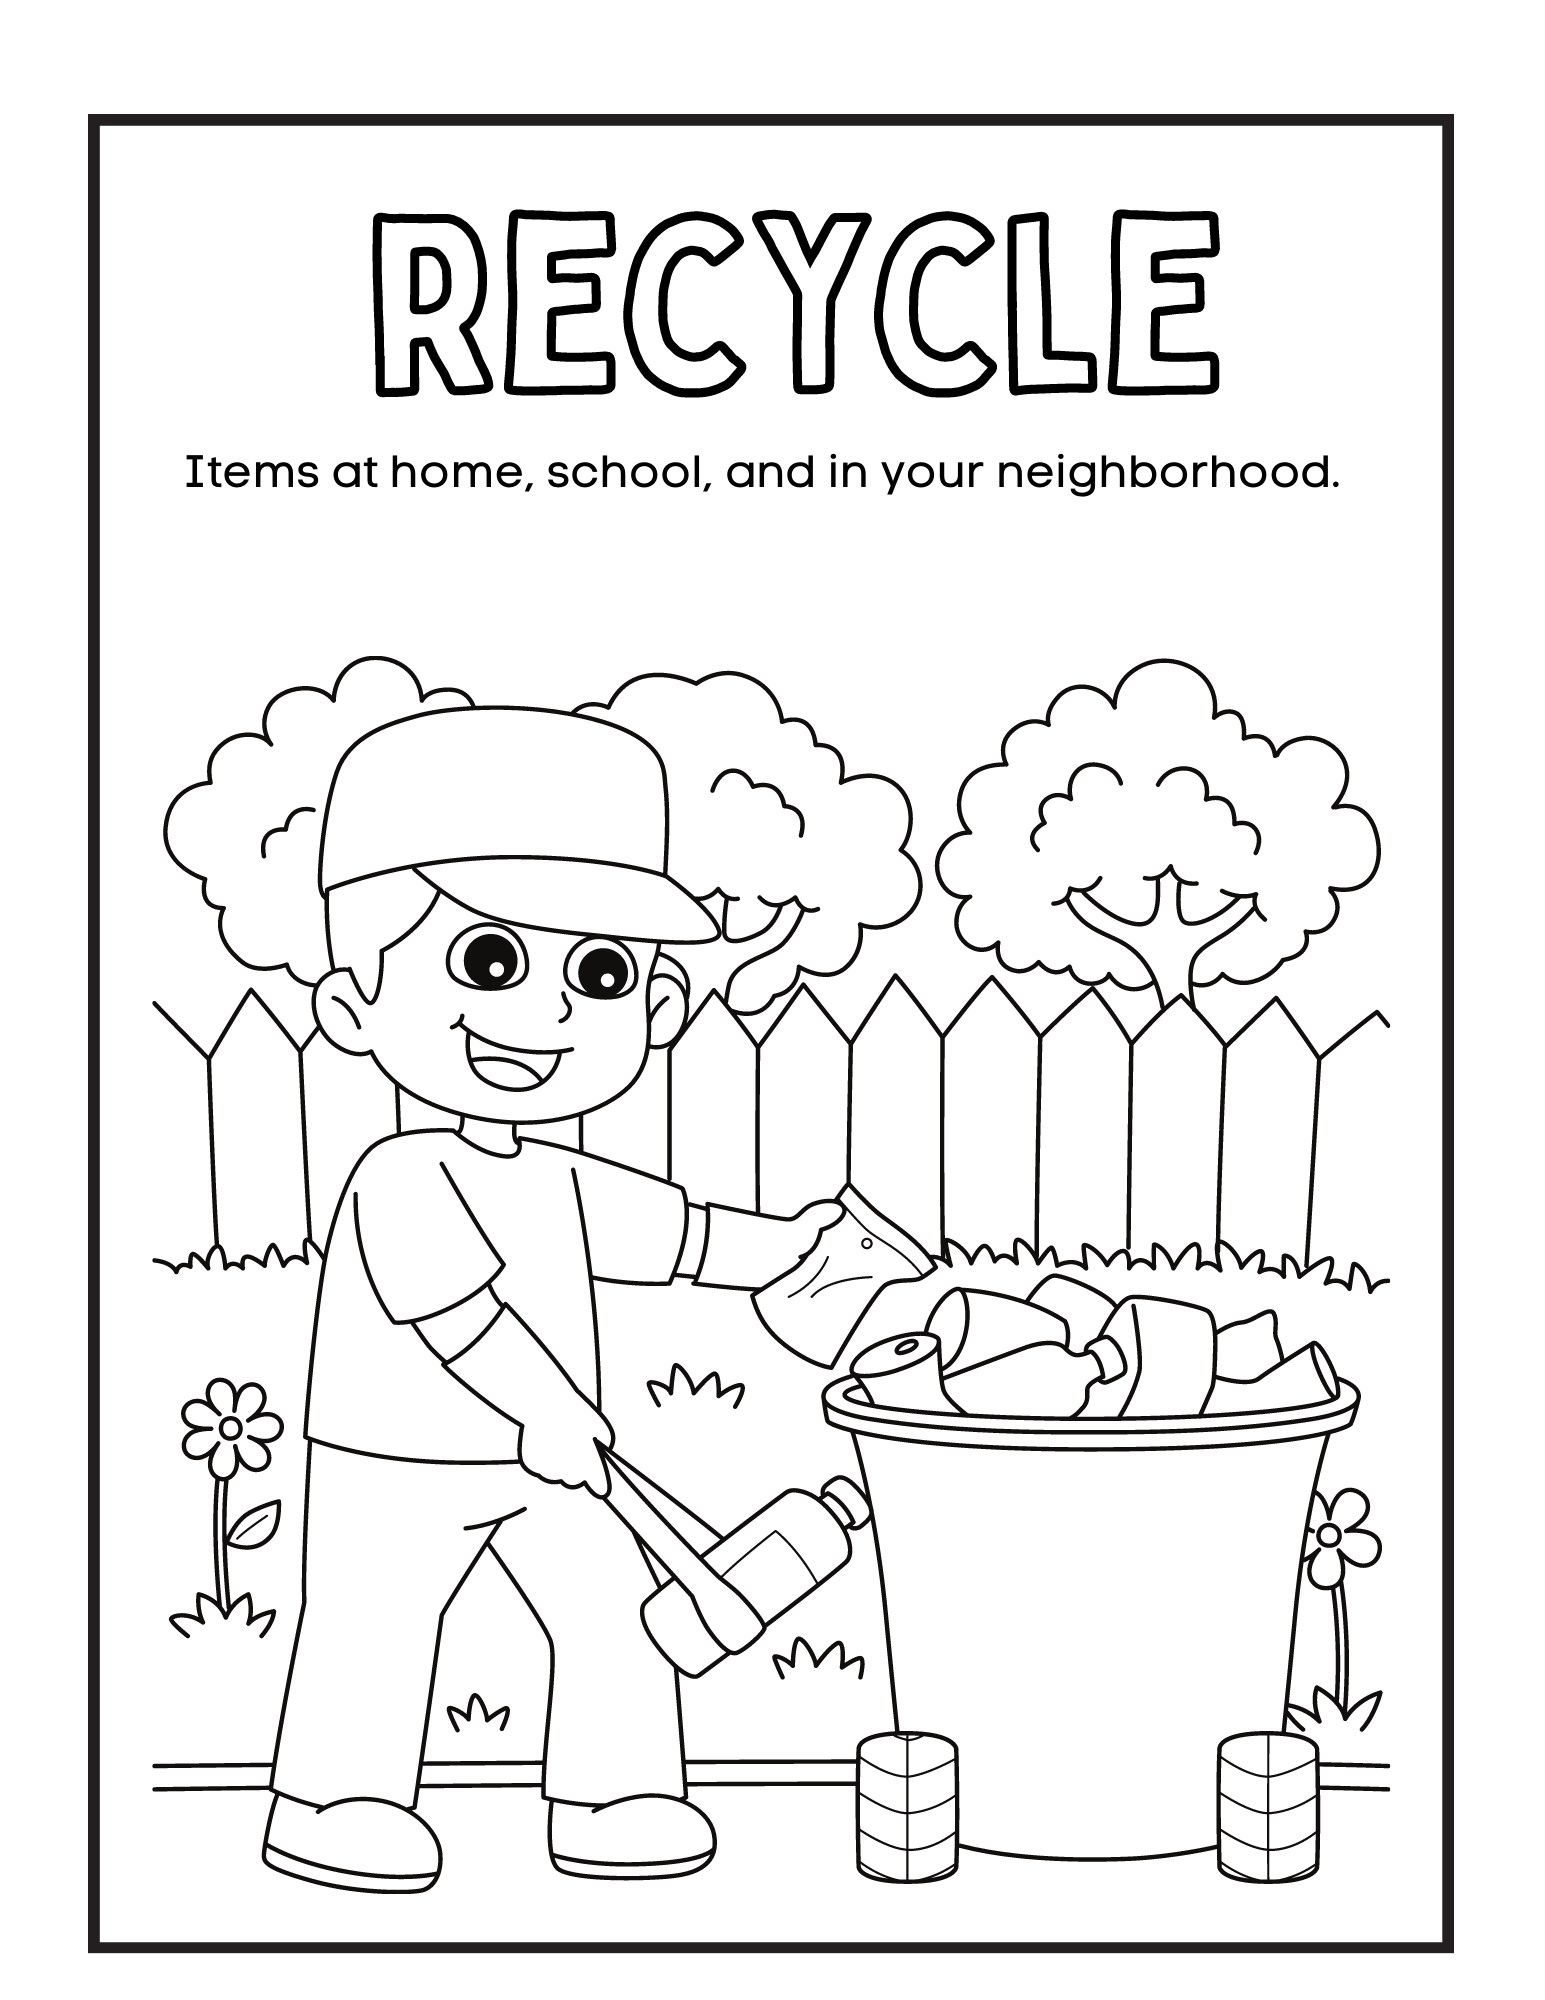 Reduce reuse recycle coloring pages â